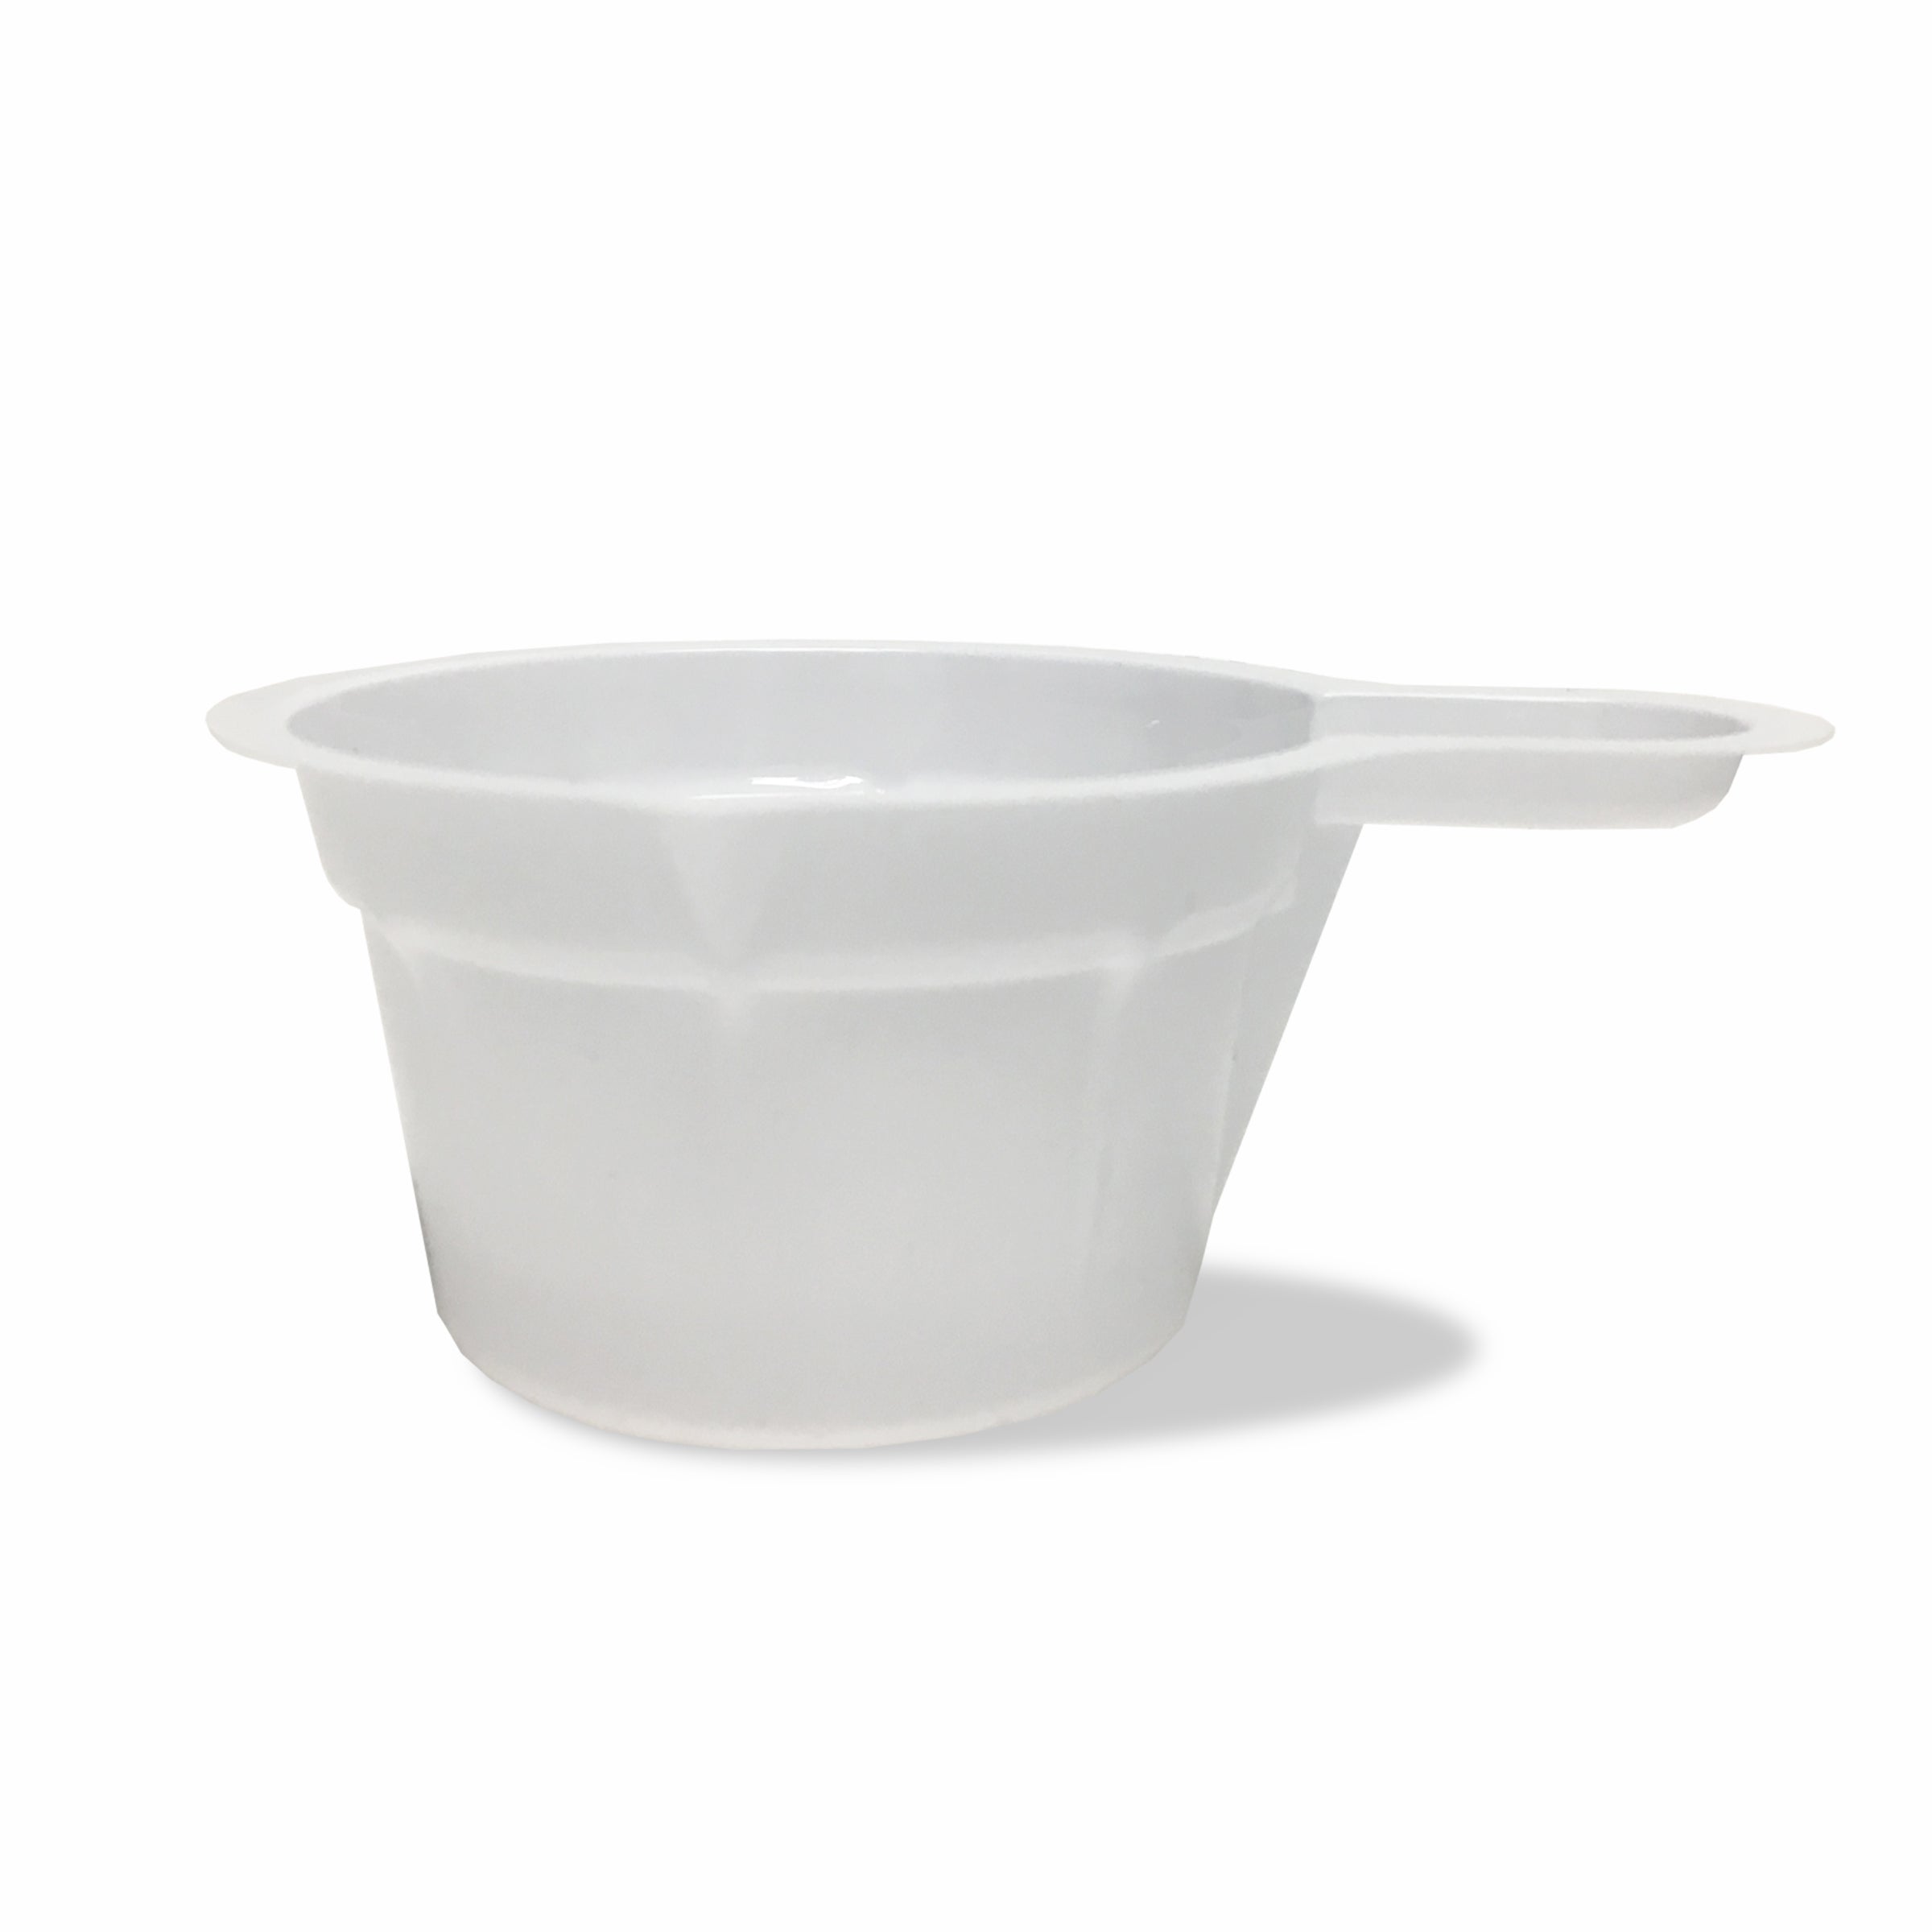 MTC Bio B6602-W, Weigh Bucket, 40ml Weigh Boat with Handle and Spout, 33 x 53mm, 500/pk